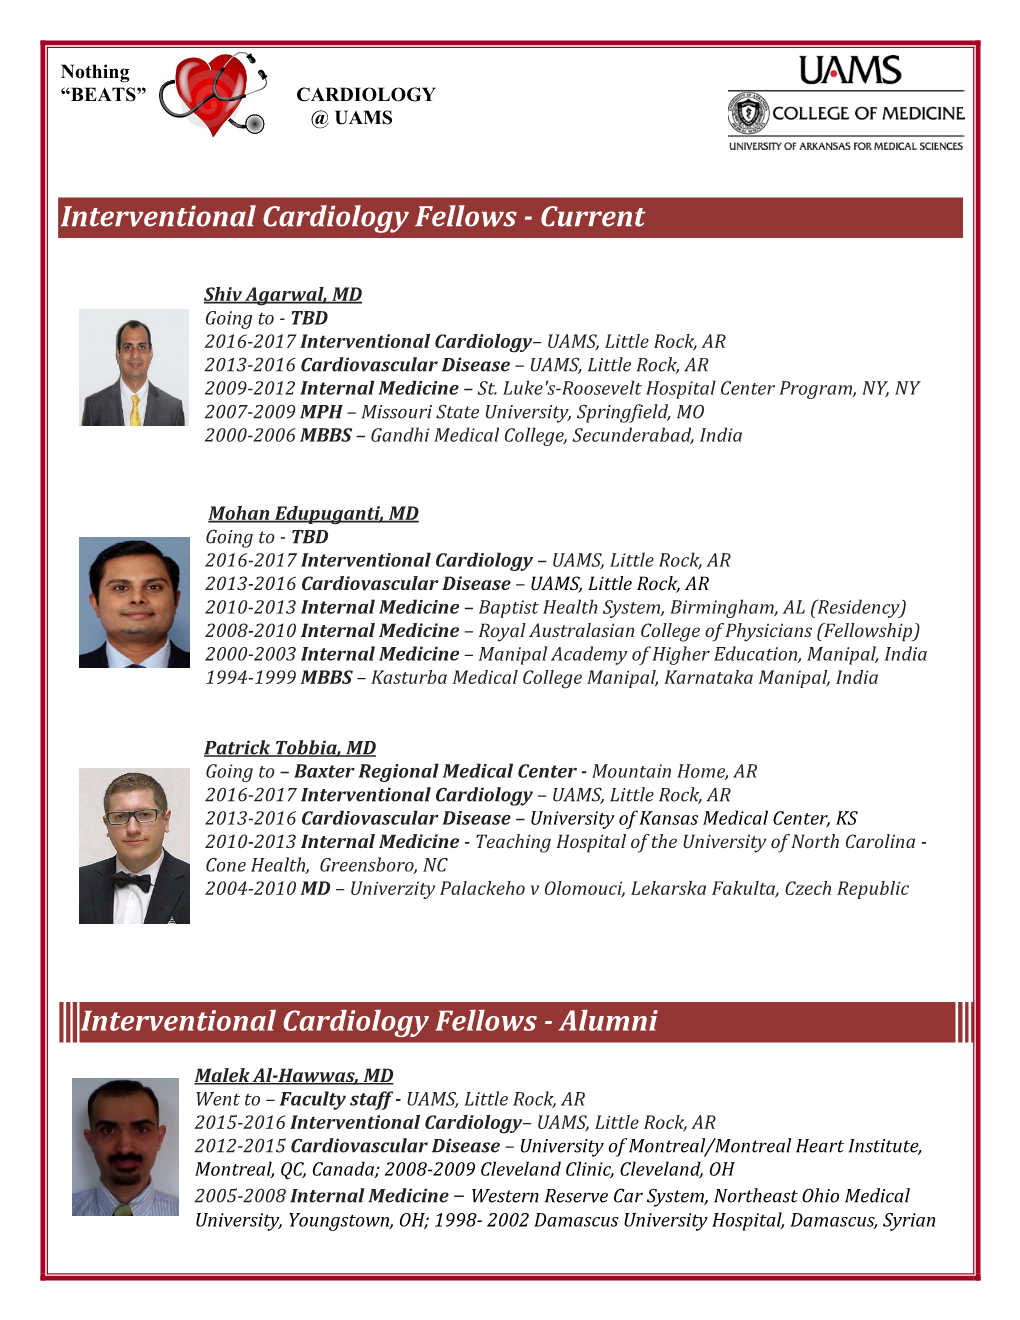 Current Interventional Cardiology Fellows